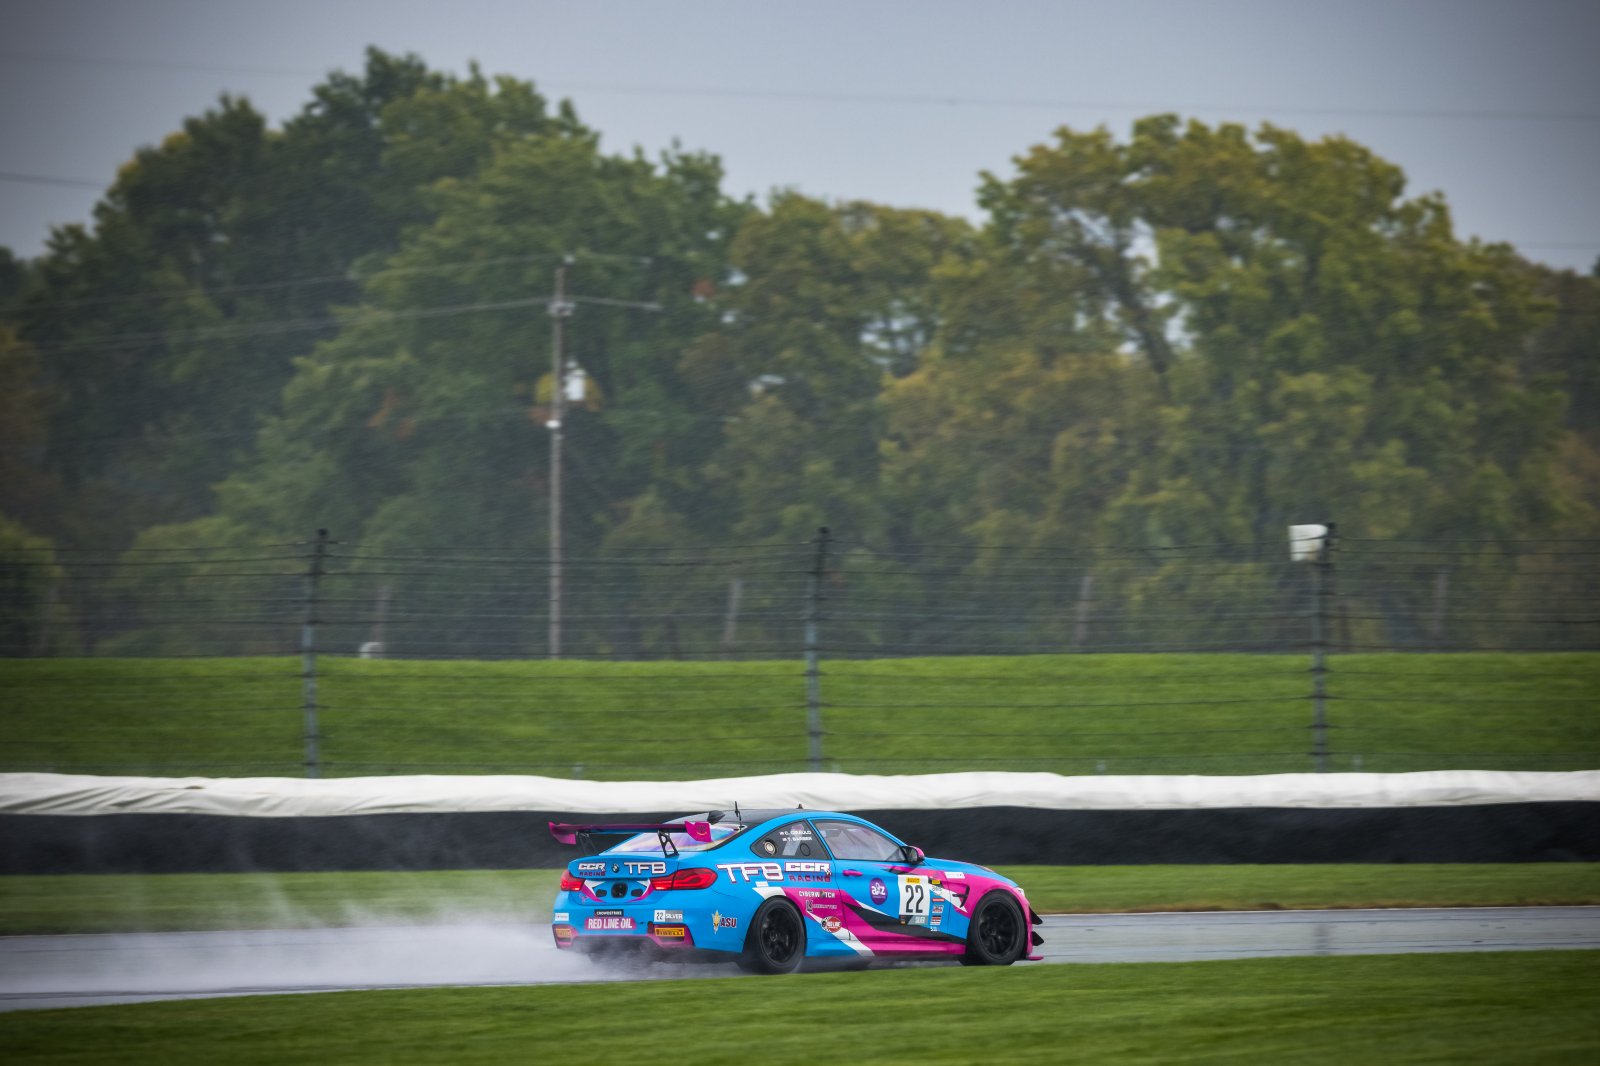 CCR Racing/Team TFB, IN, Indianapolis, Indianapolis Motor Speedway, October 2021#22 BMW M4 GT4 of Cole Ciraulo and Tim Barber, Pirelli GT4 America, SL, SRO, USA
 | Fabian Lagunas/SRO